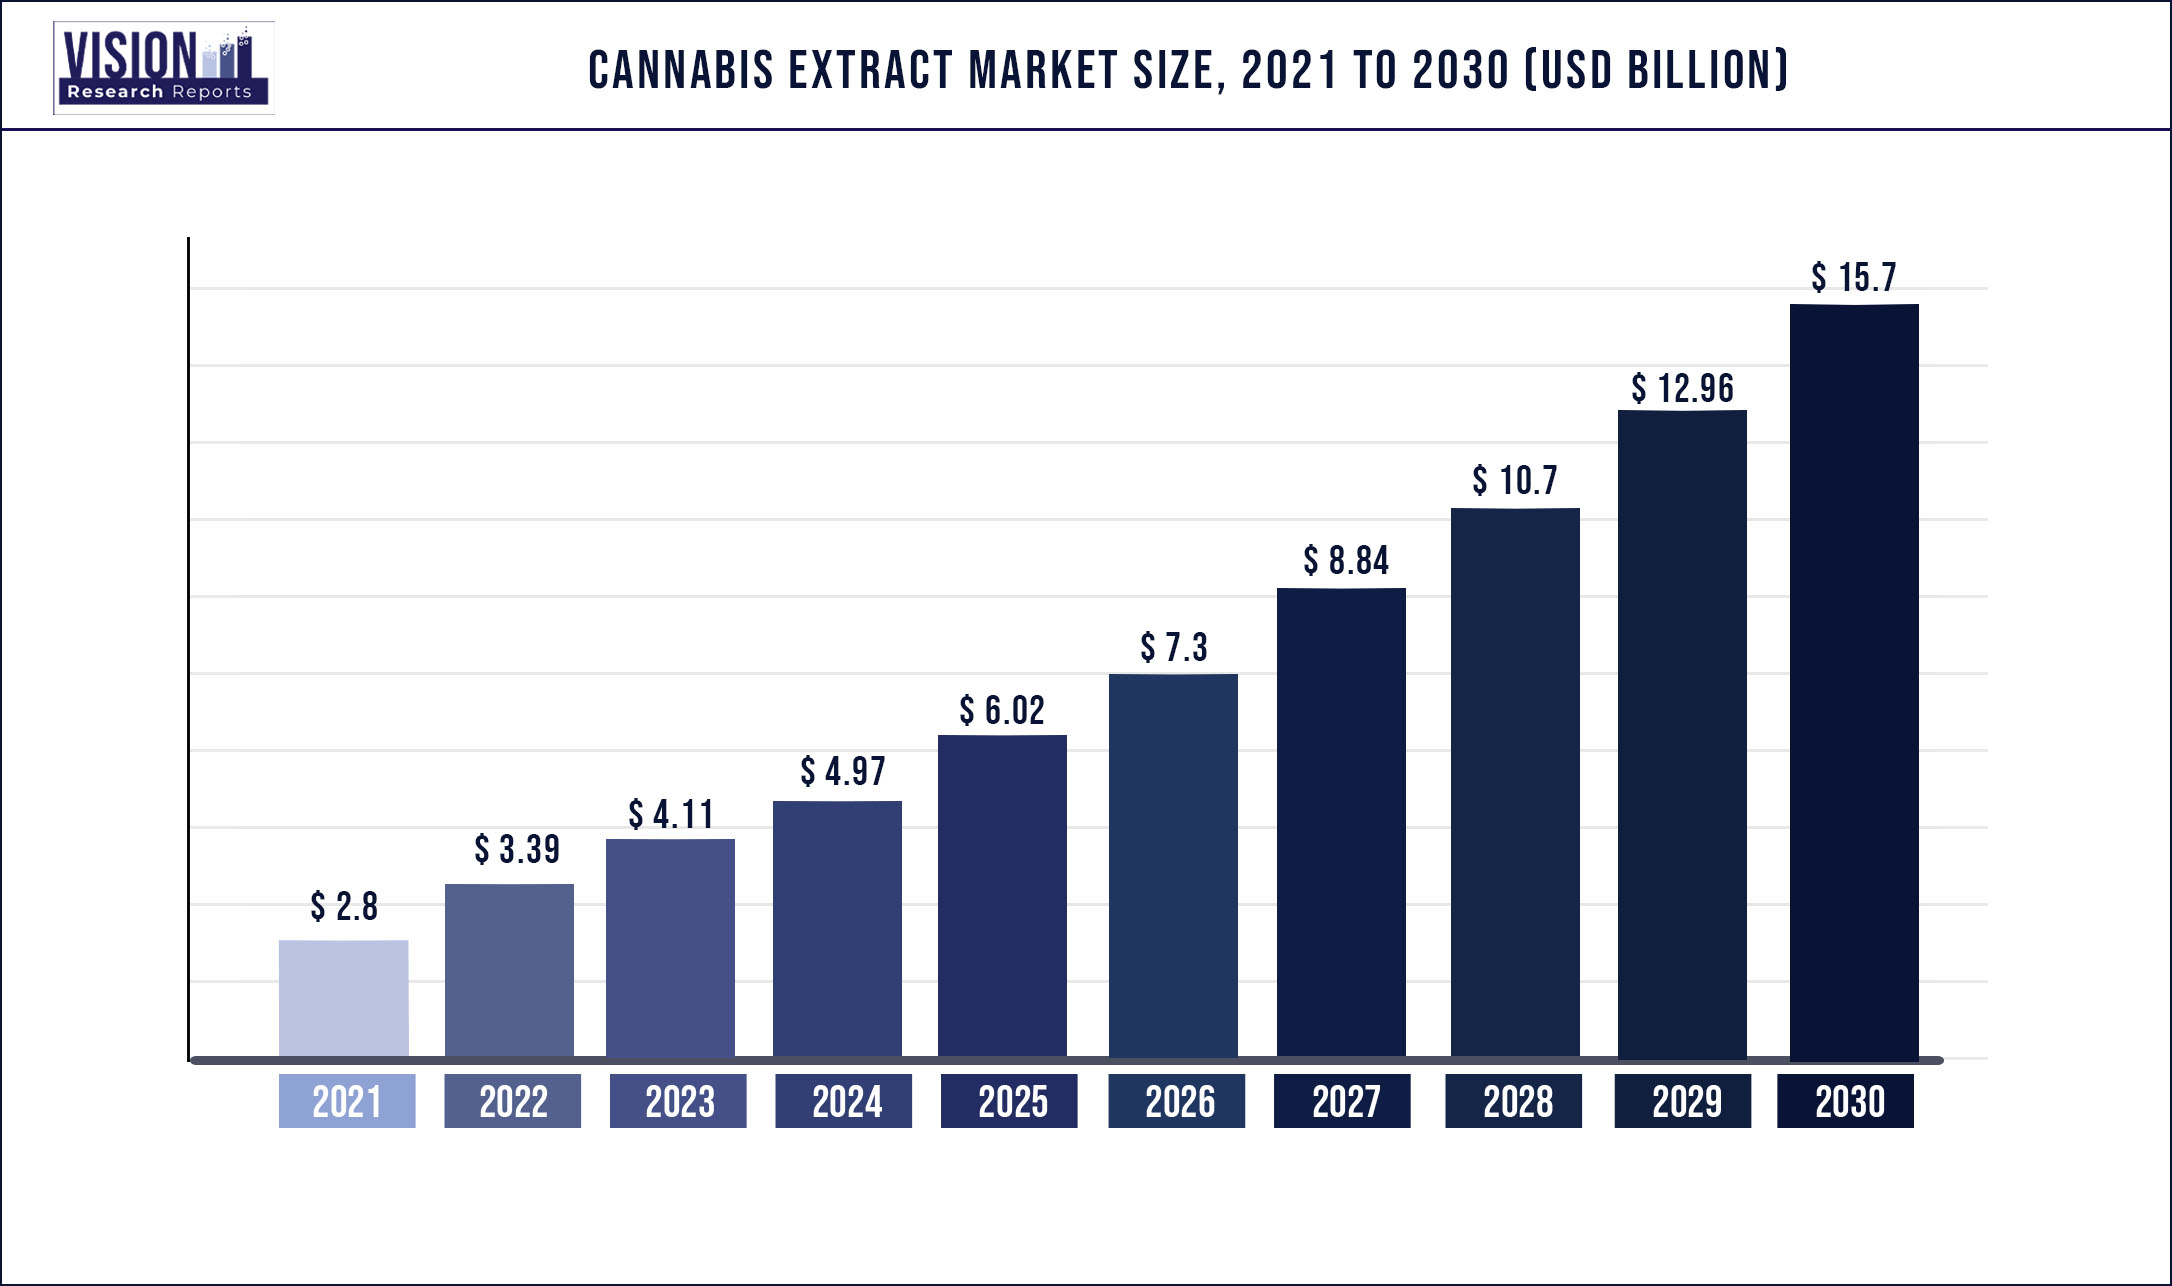 Cannabis Extract Market Size 2021 to 2030